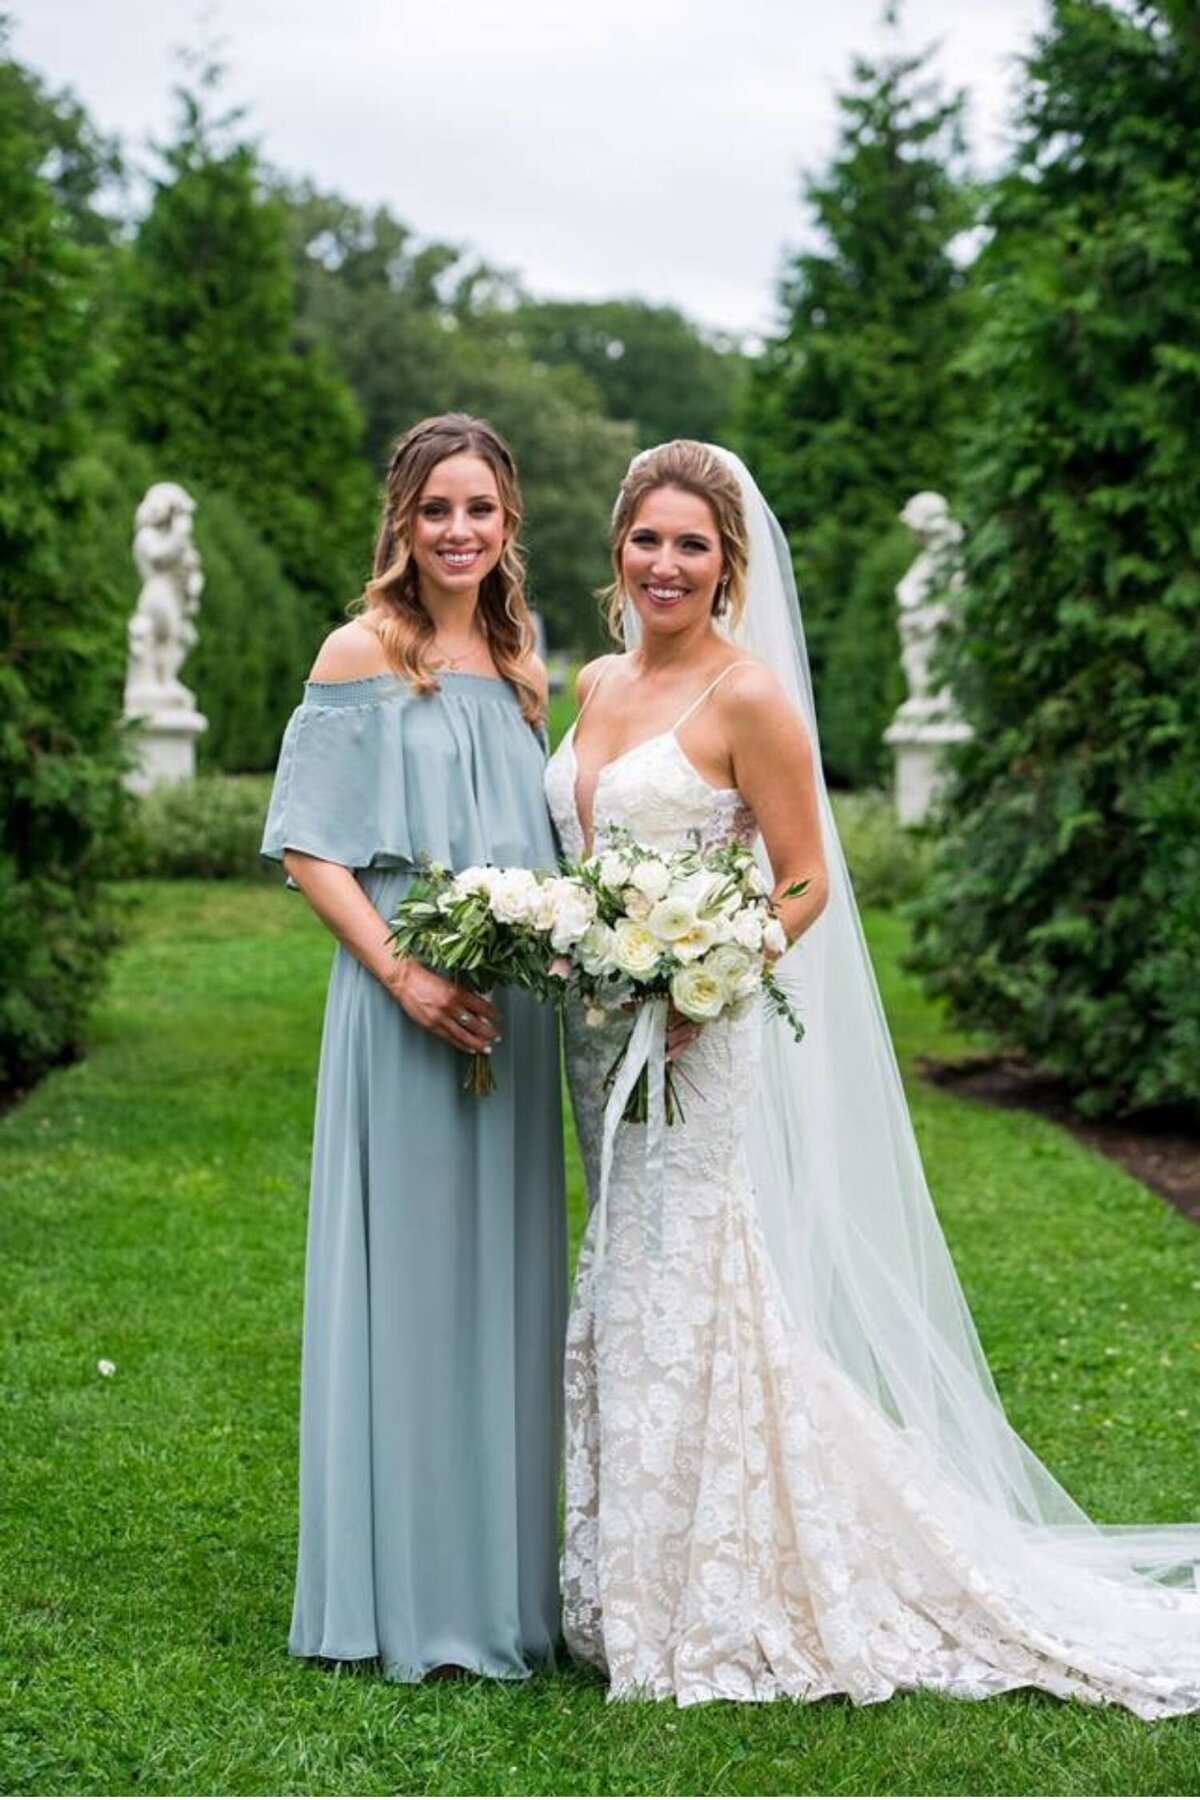 Maid of honor portraits at a luxury Italian inspired Chicago North Shore wedding.